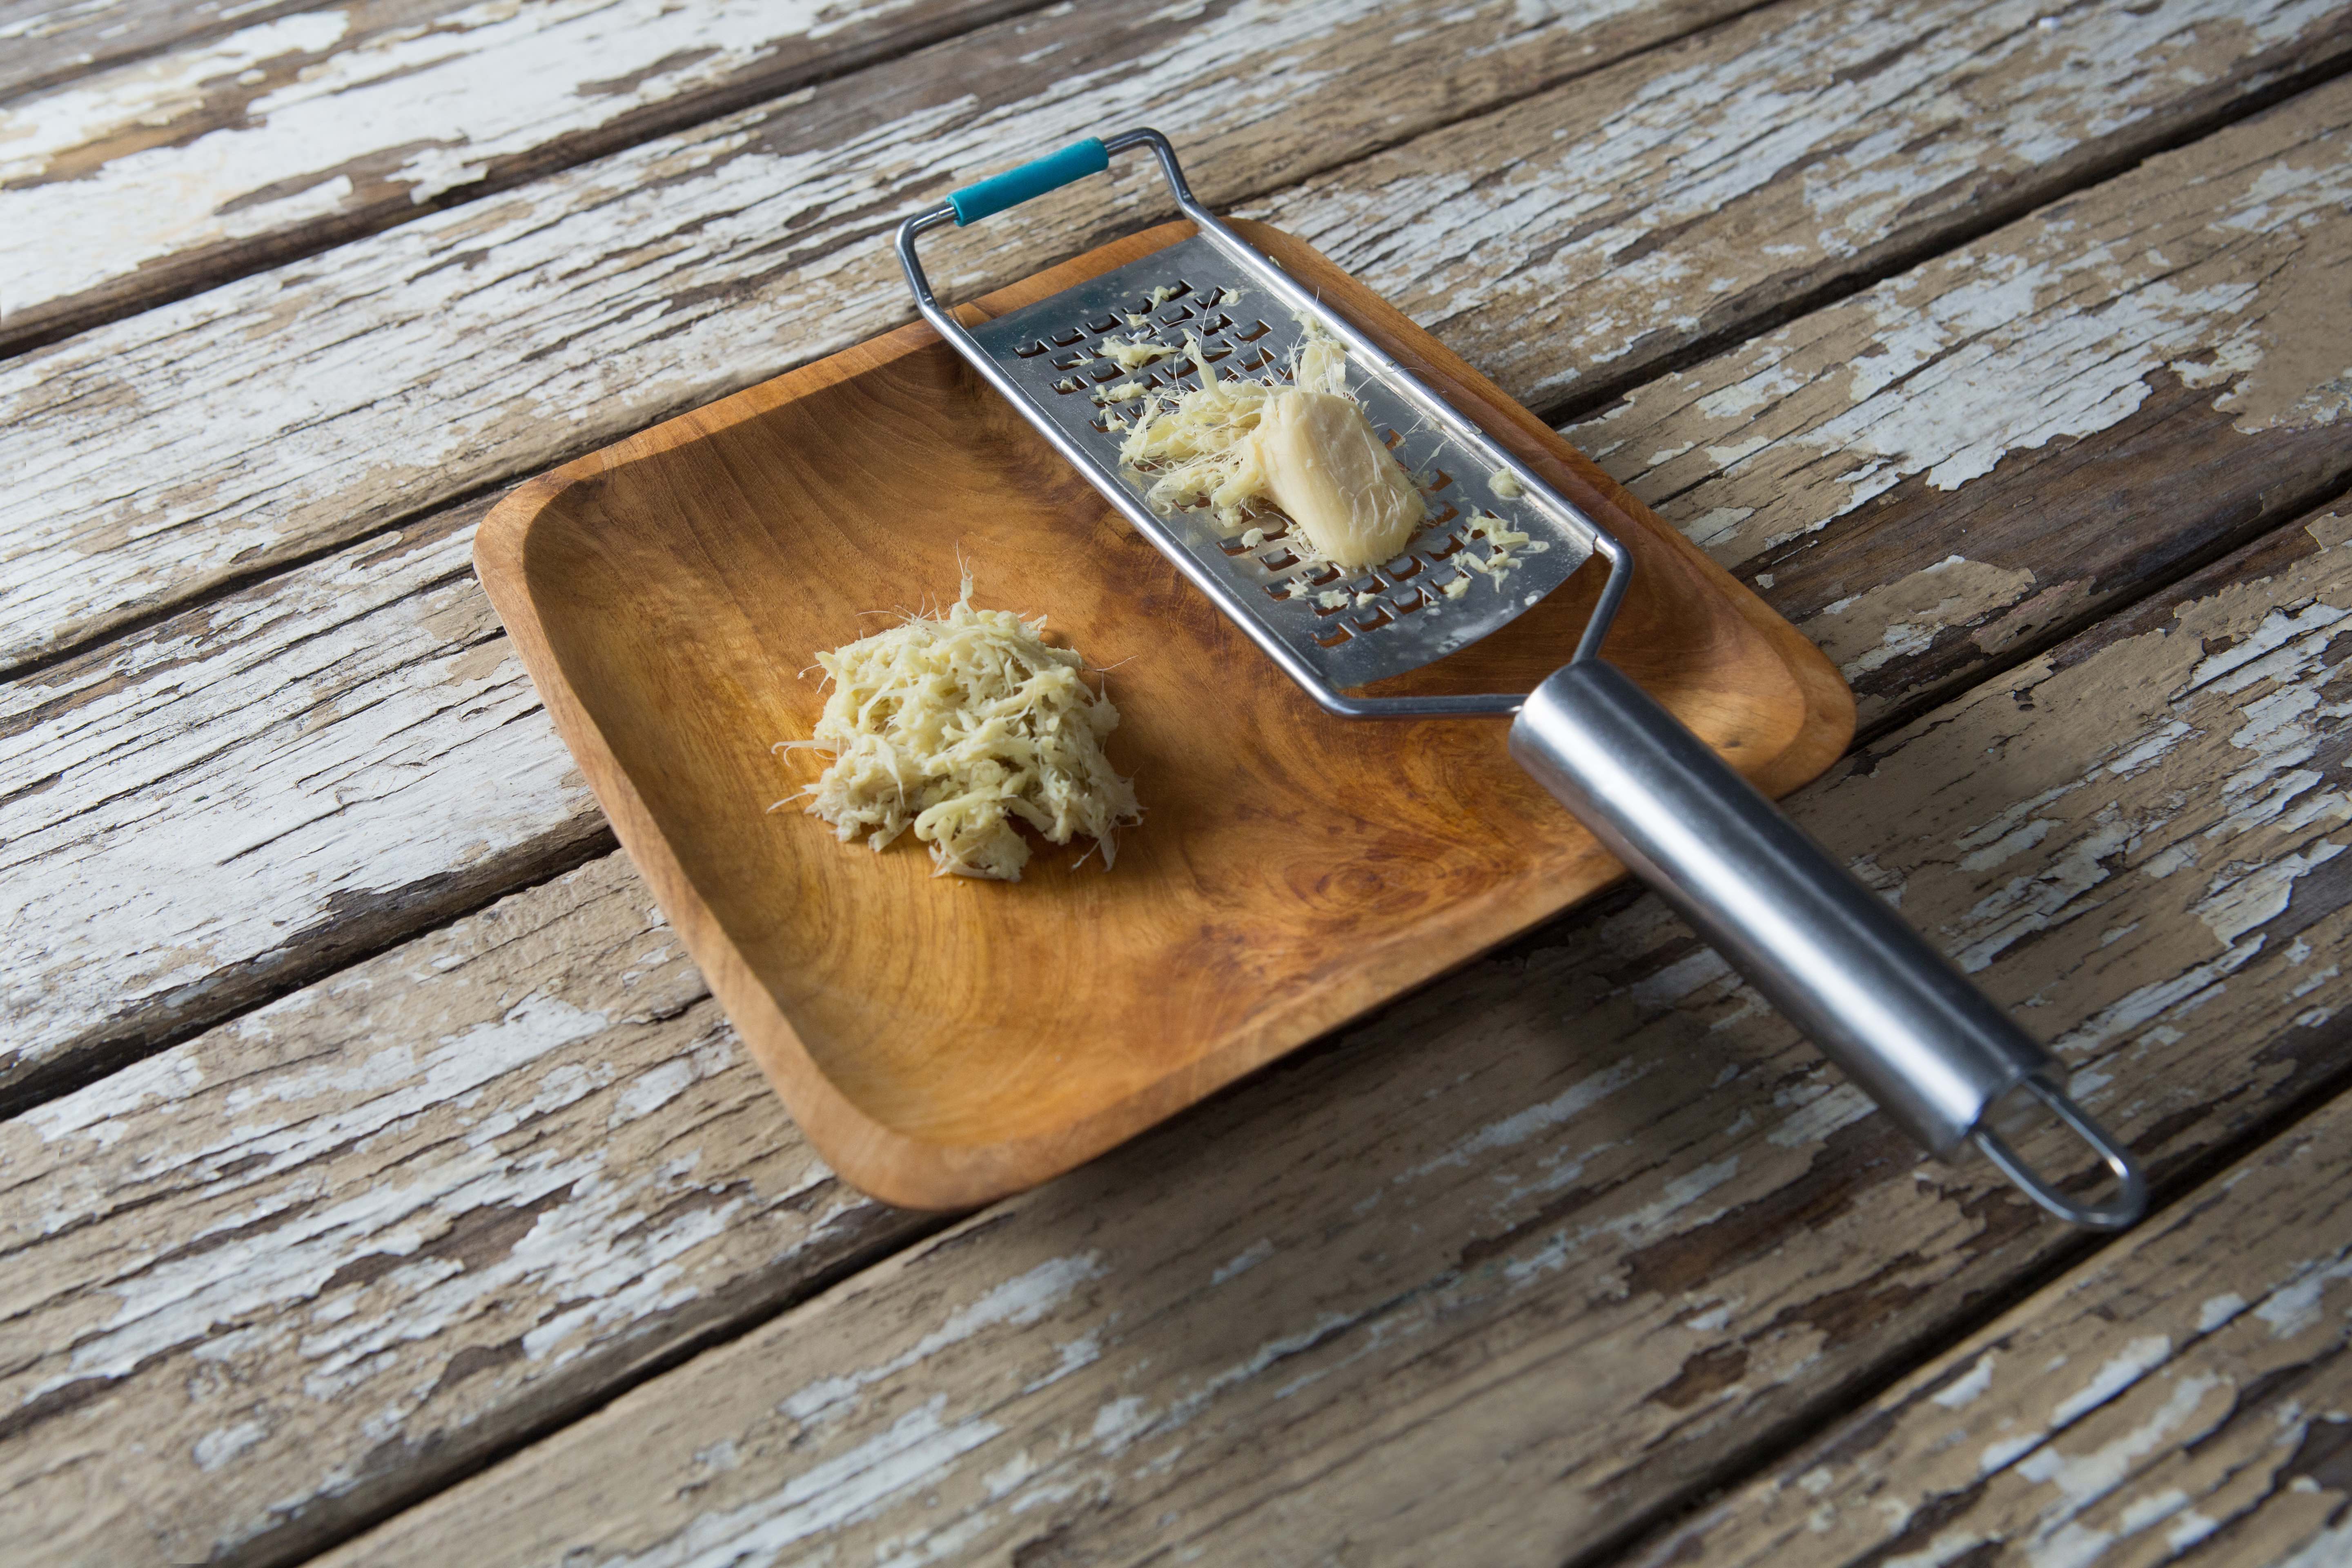 Steel grater and ginger in wooden plate on weathered table